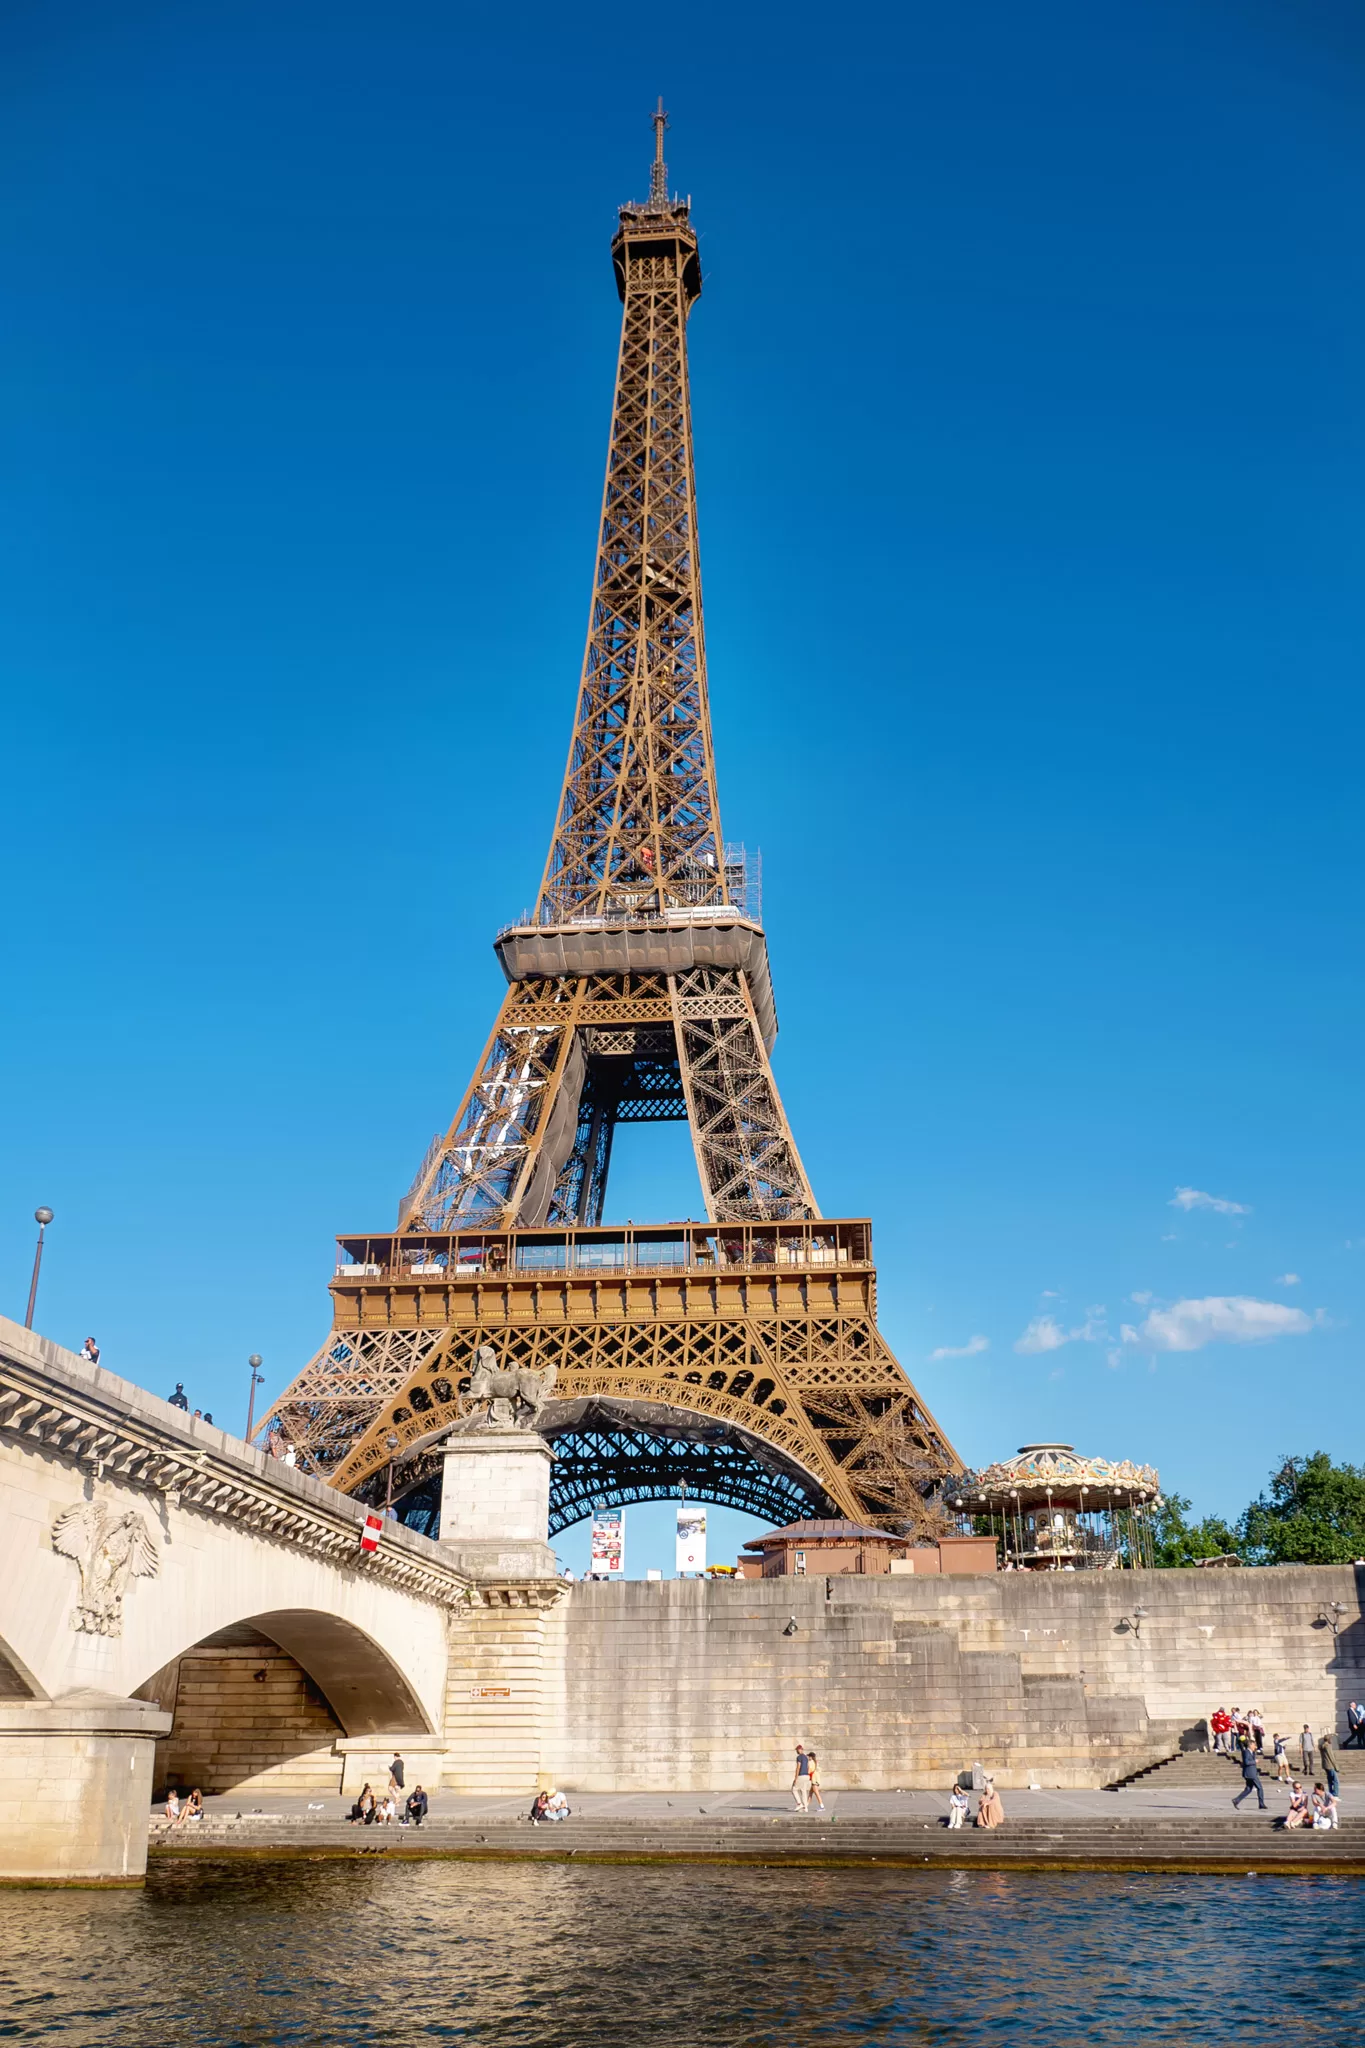 View of the Eiffel Tower from a Seine River Cruise on a trip to Paris